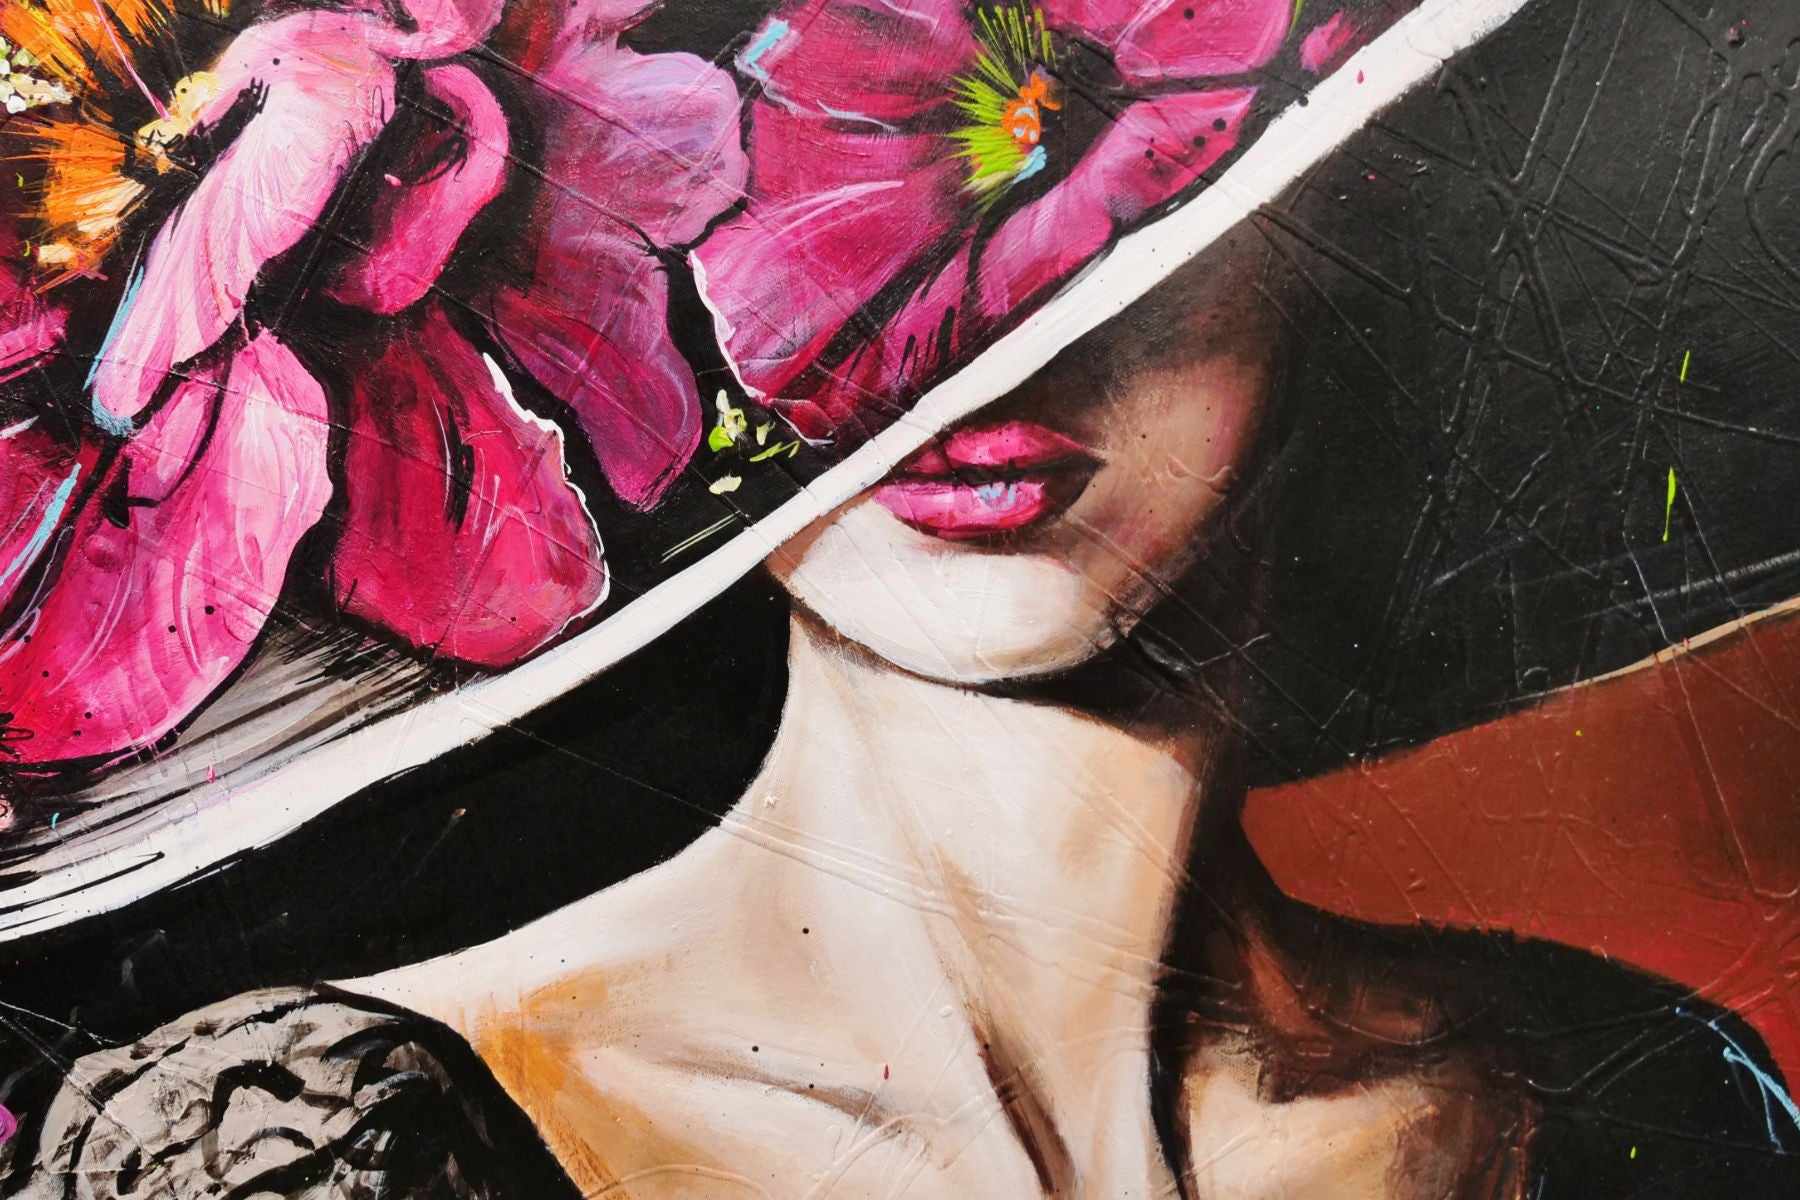 Bella 140cm x 180cm Flower Hat Abstract Elegance Textured Painting